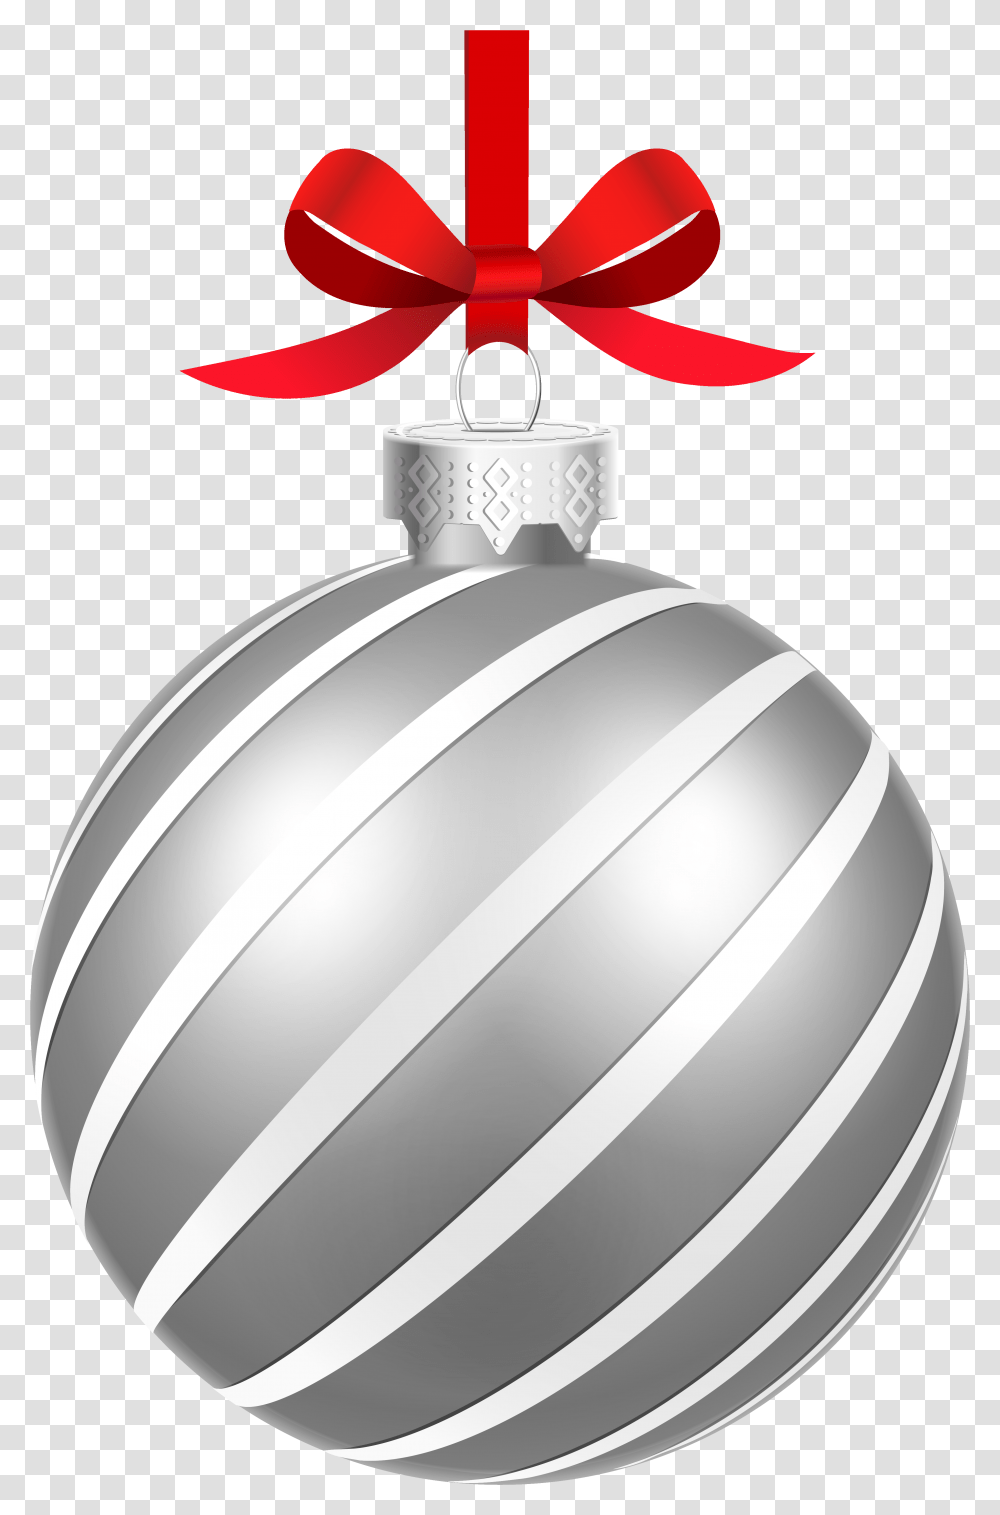 Silver Striped Christmas Ball Clipart Image Silver Christmas Ball, Ornament, Ring, Jewelry, Accessories Transparent Png